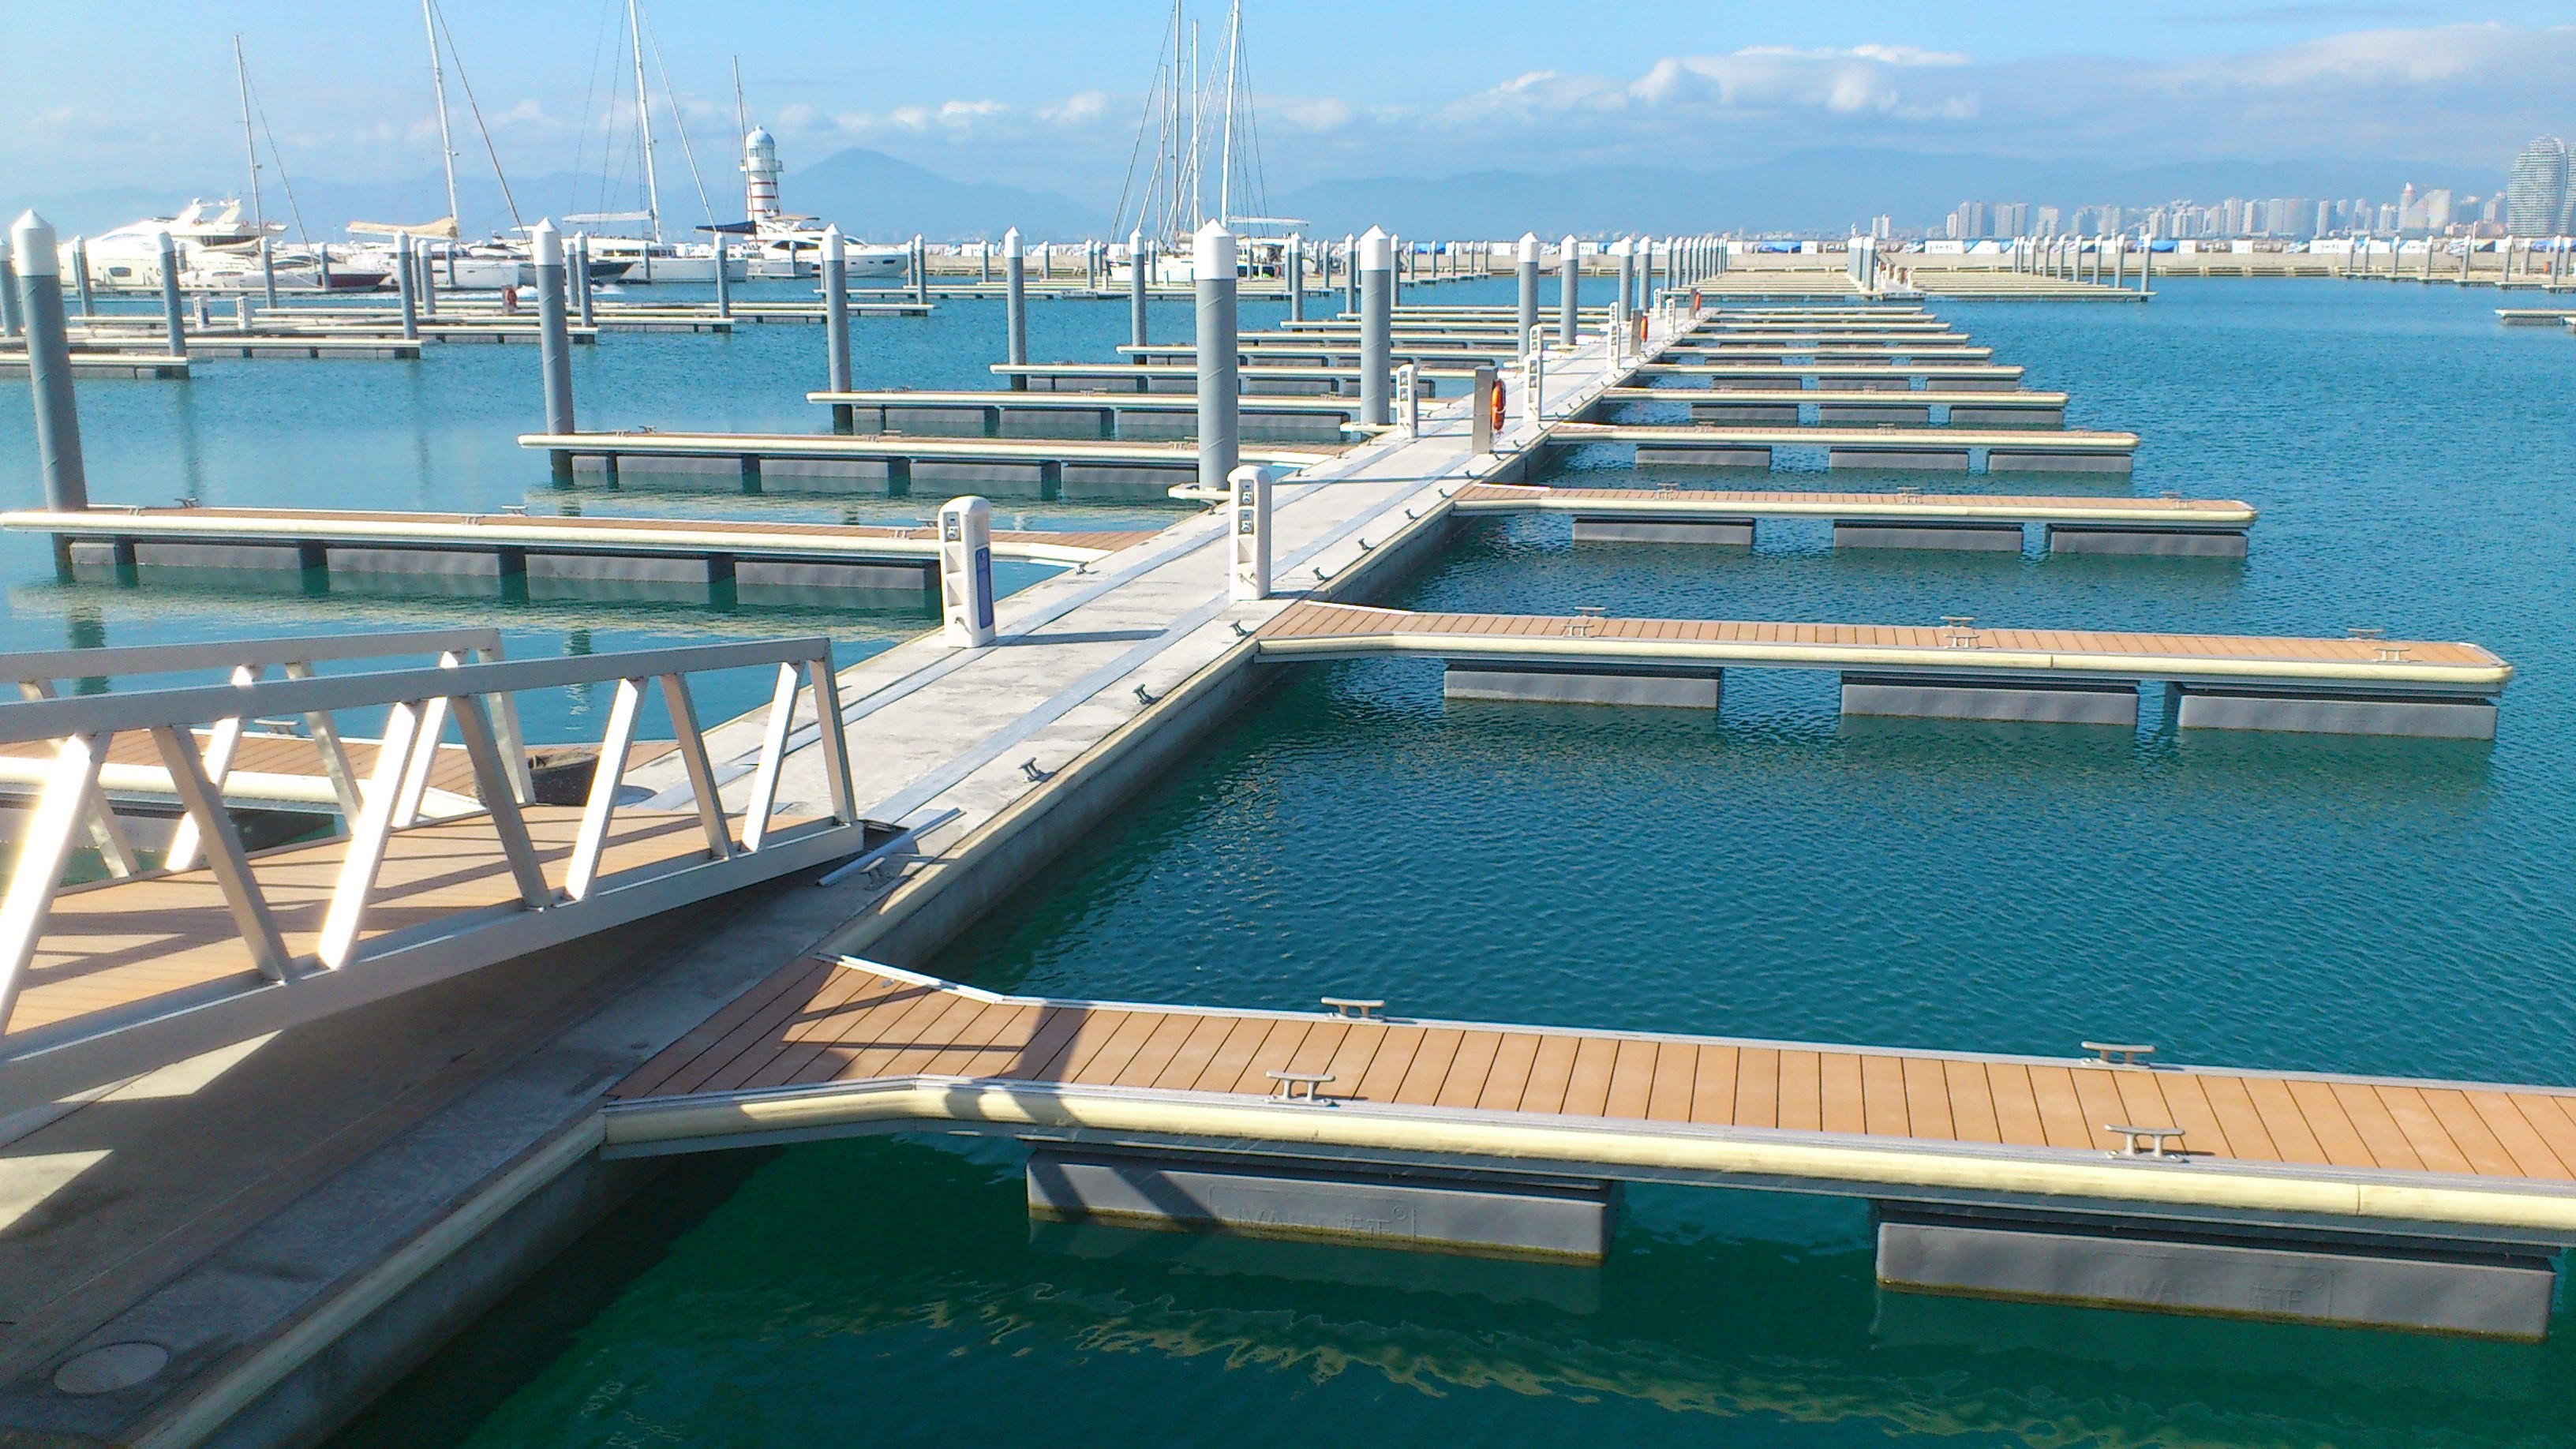 What are the advantages of floating docks?